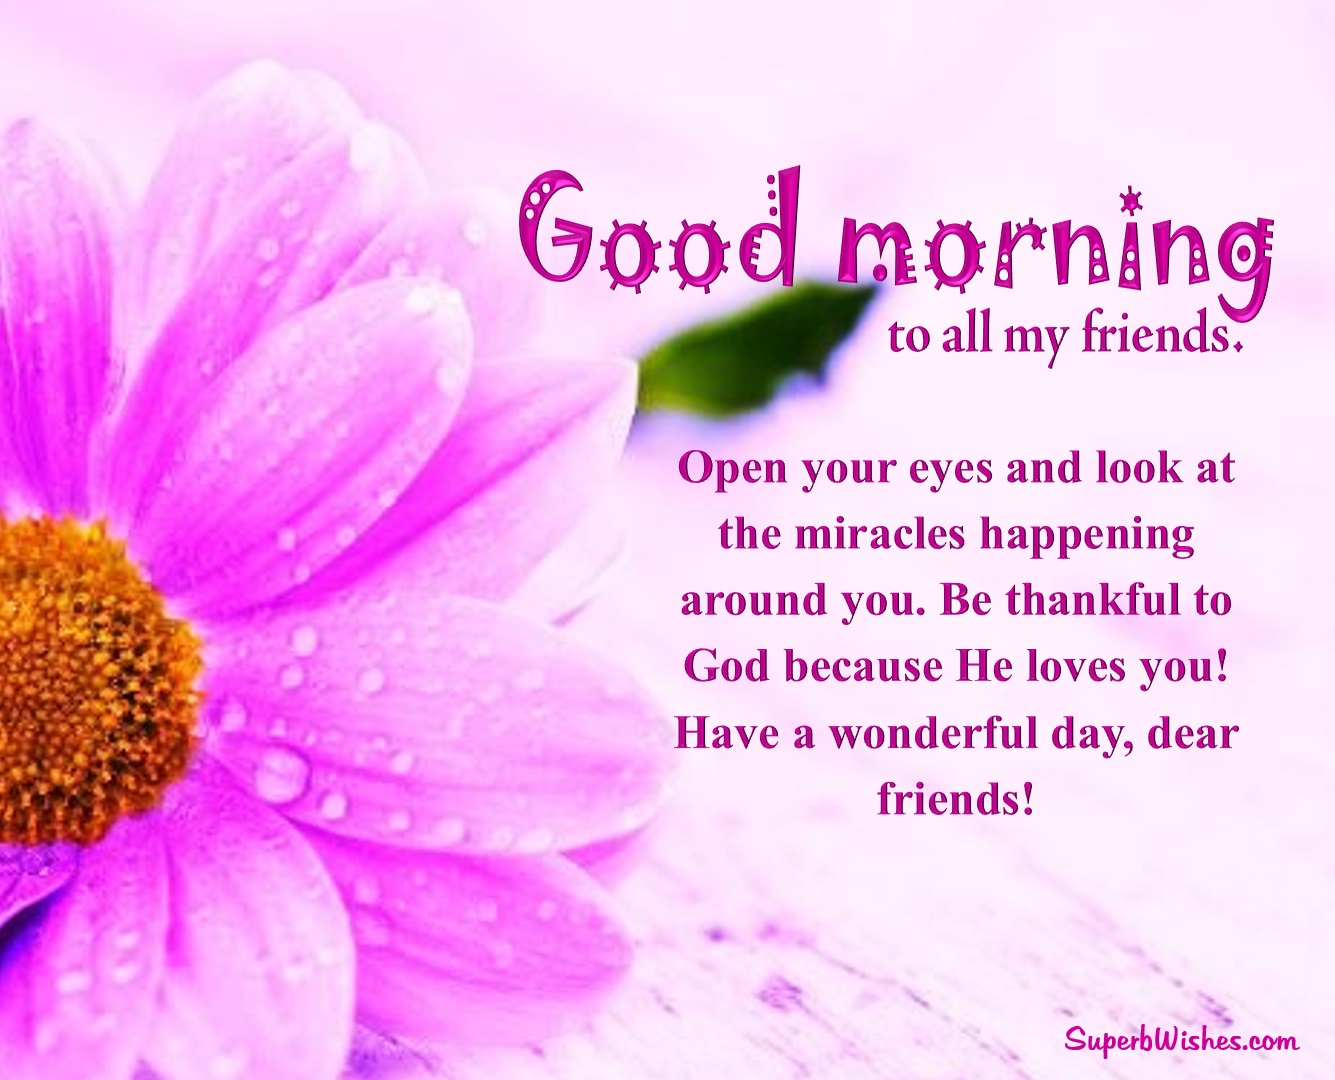 Good Morning Wishes For Friends Images - God Loves You | SuperbWishes